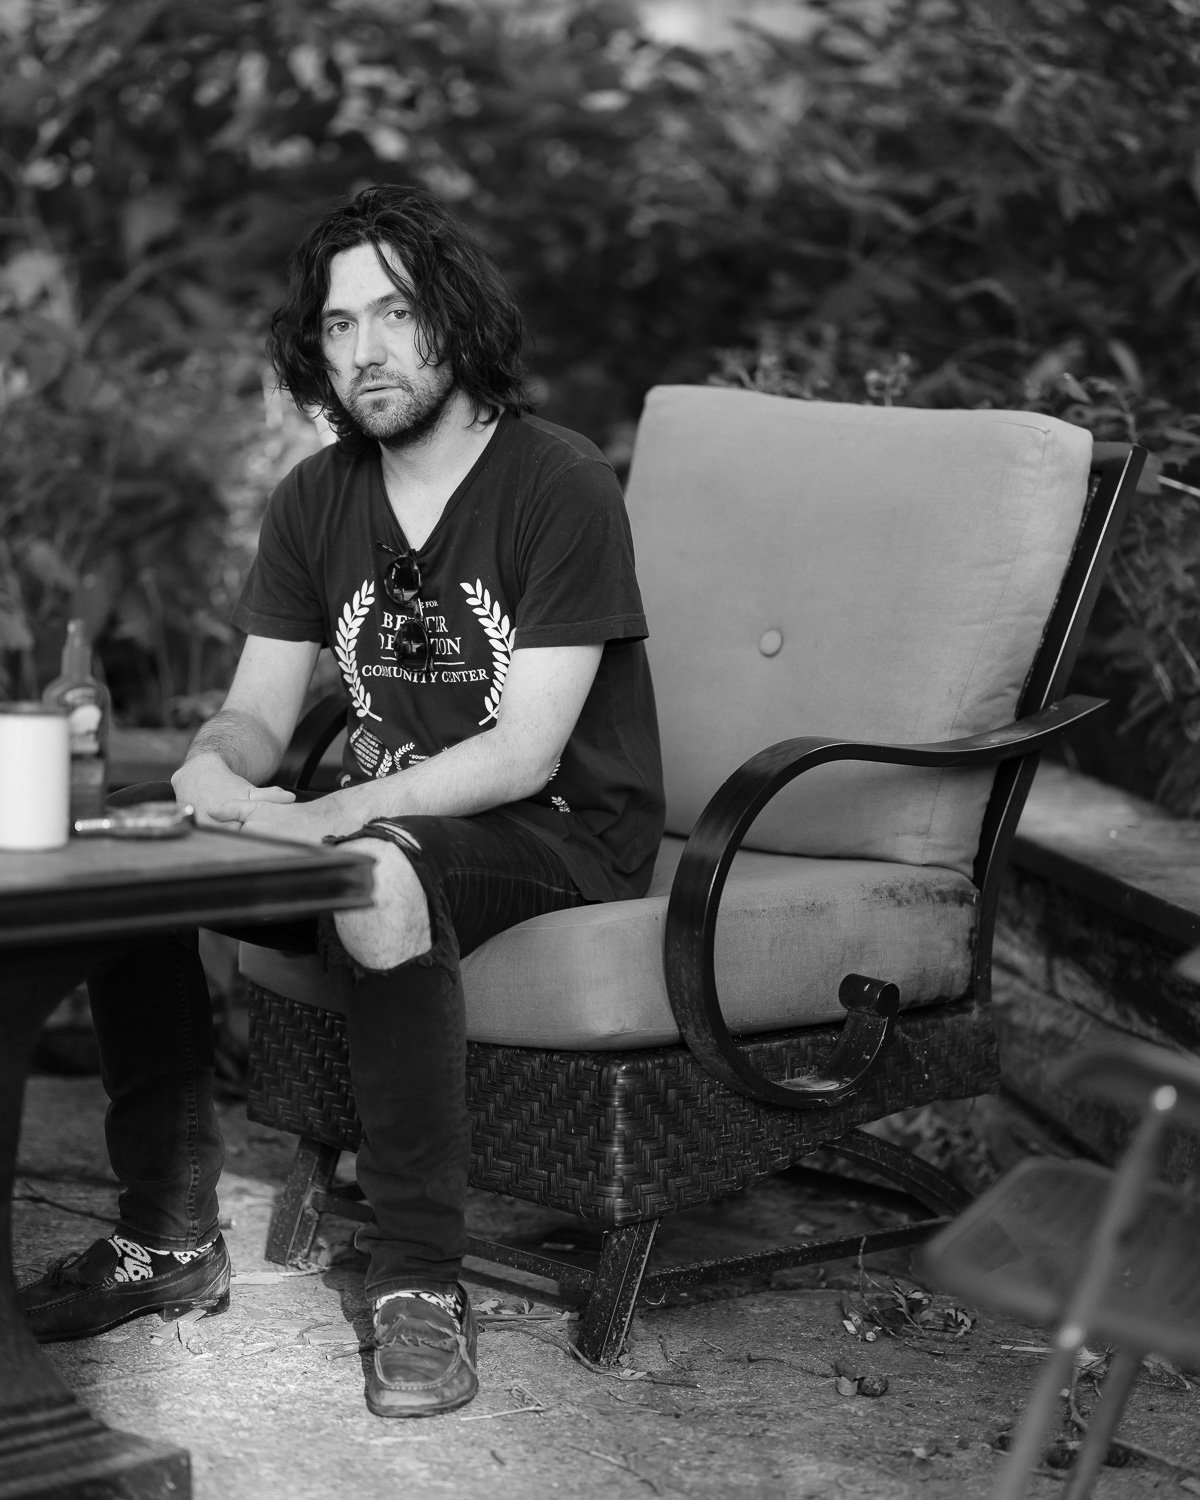  Musician Conor Oberst of Bright Eyes at his home in Omaha, NE, for The New York Times, 2020 